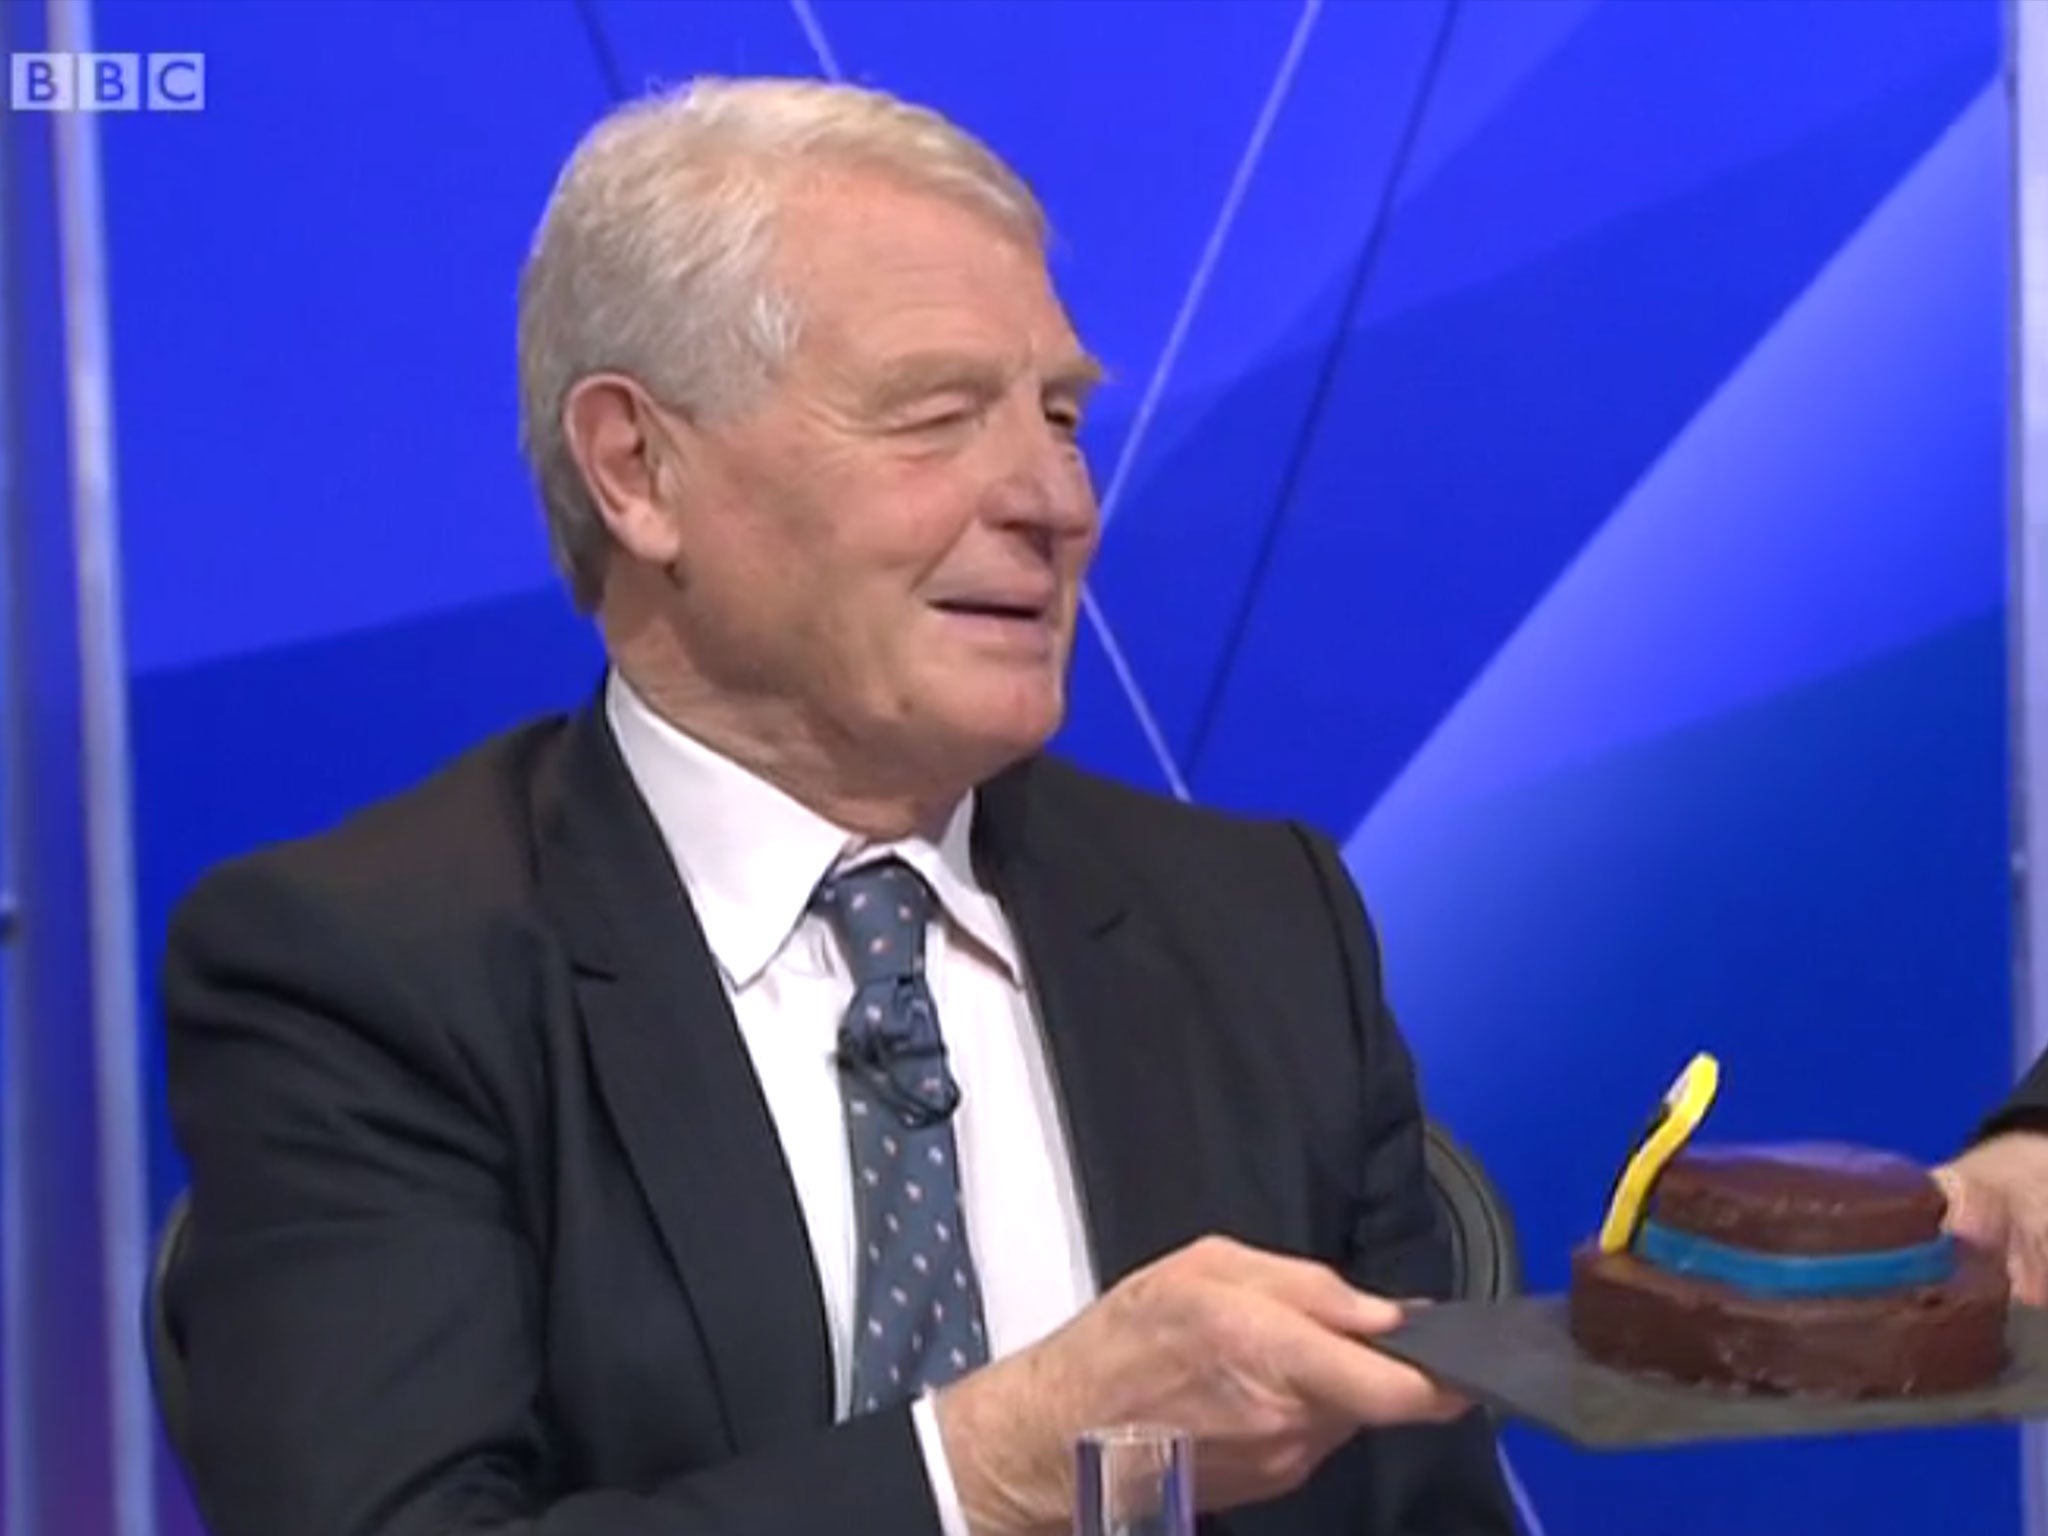 Lord Ashdown said he'd eat his hat if the Conservatives claimed a majority in the election